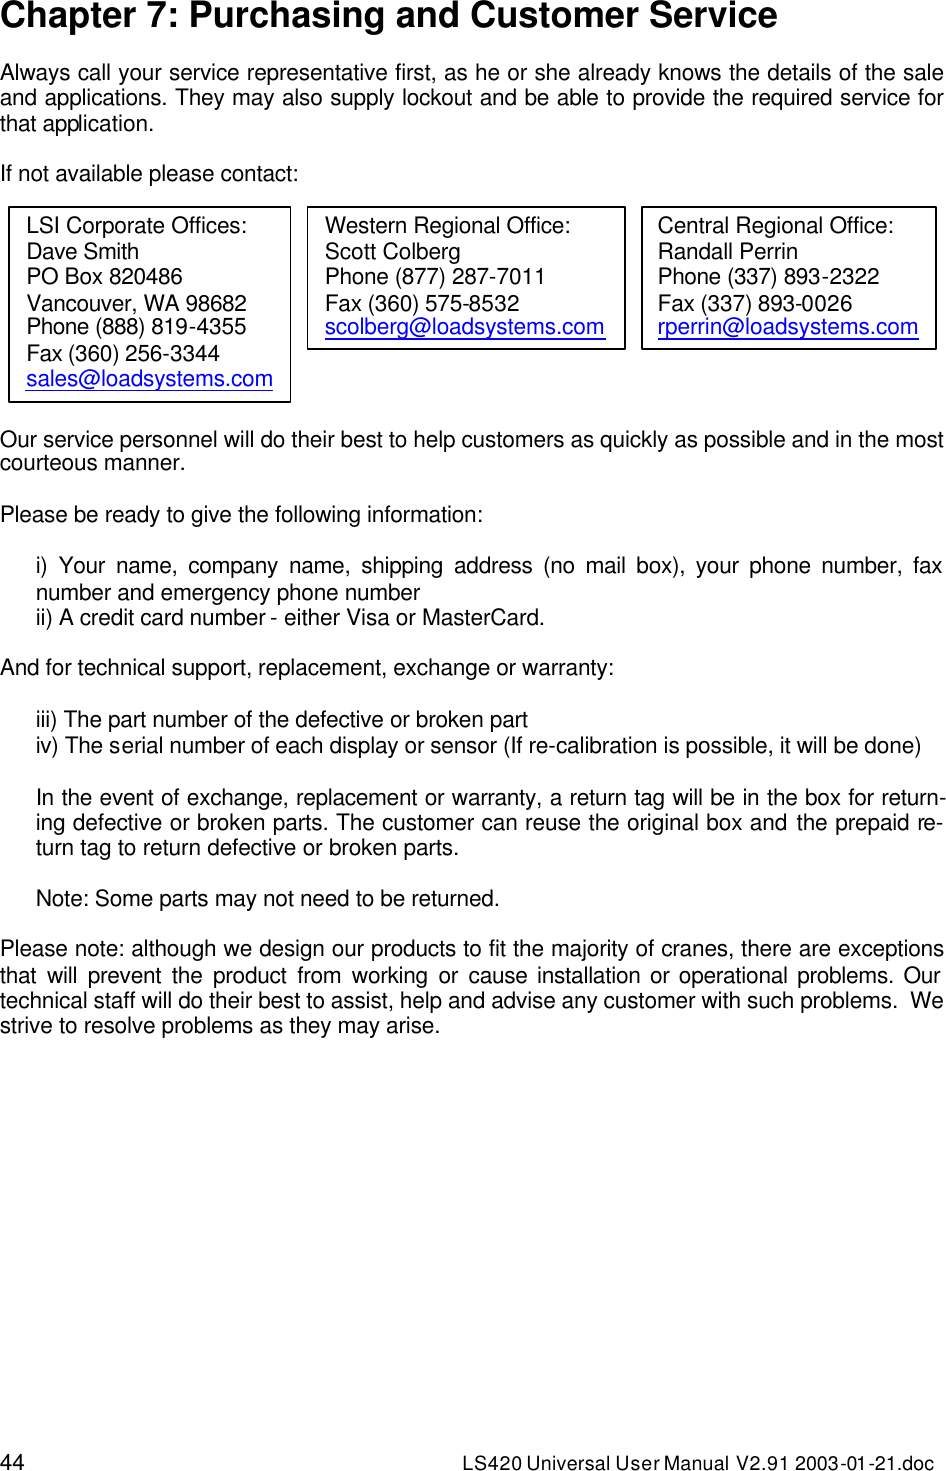 44 LS420 Universal User Manual V2.91 2003-01 -21.doc Chapter 7: Purchasing and Customer Service  Always call your service representative first, as he or she already knows the details of the sale and applications. They may also supply lockout and be able to provide the required service for that application.  If not available please contact:  Our service personnel will do their best to help customers as quickly as possible and in the most courteous manner.  Please be ready to give the following information:  i) Your name, company name, shipping address (no mail box), your phone number, fax number and emergency phone number ii) A credit card number - either Visa or MasterCard.  And for technical support, replacement, exchange or warranty:  iii) The part number of the defective or broken part iv) The serial number of each display or sensor (If re-calibration is possible, it will be done)  In the event of exchange, replacement or warranty, a return tag will be in the box for return-ing defective or broken parts. The customer can reuse the original box and the prepaid re-turn tag to return defective or broken parts.  Note: Some parts may not need to be returned.  Please note: although we design our products to fit the majority of cranes, there are exceptions that will prevent the product from working or cause installation or operational problems. Our technical staff will do their best to assist, help and advise any customer with such problems.  We strive to resolve problems as they may arise.   LSI Corporate Offices: Dave Smith PO Box 820486 Vancouver, WA 98682 Phone (888) 819-4355 Fax (360) 256-3344 sales@loadsystems.com Western Regional Office: Scott Colberg Phone (877) 287-7011 Fax (360) 575-8532 scolberg@loadsystems.com Central Regional Office: Randall Perrin Phone (337) 893-2322 Fax (337) 893-0026 rperrin@loadsystems.com 